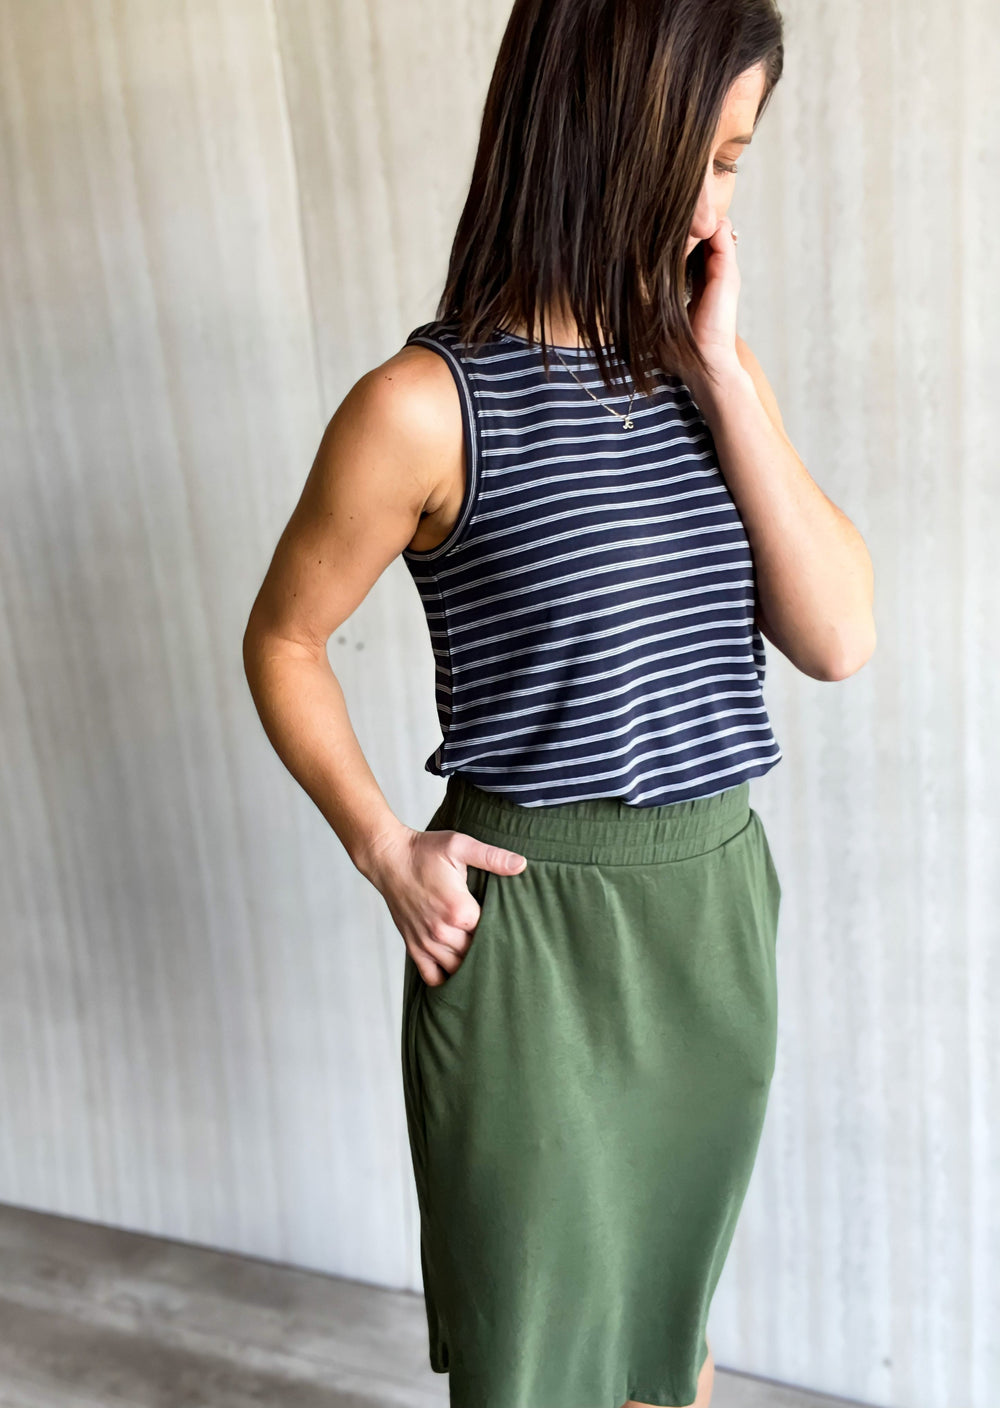 Army Green Tulip Hem Skirt with pockets paired with a navy and white tank top